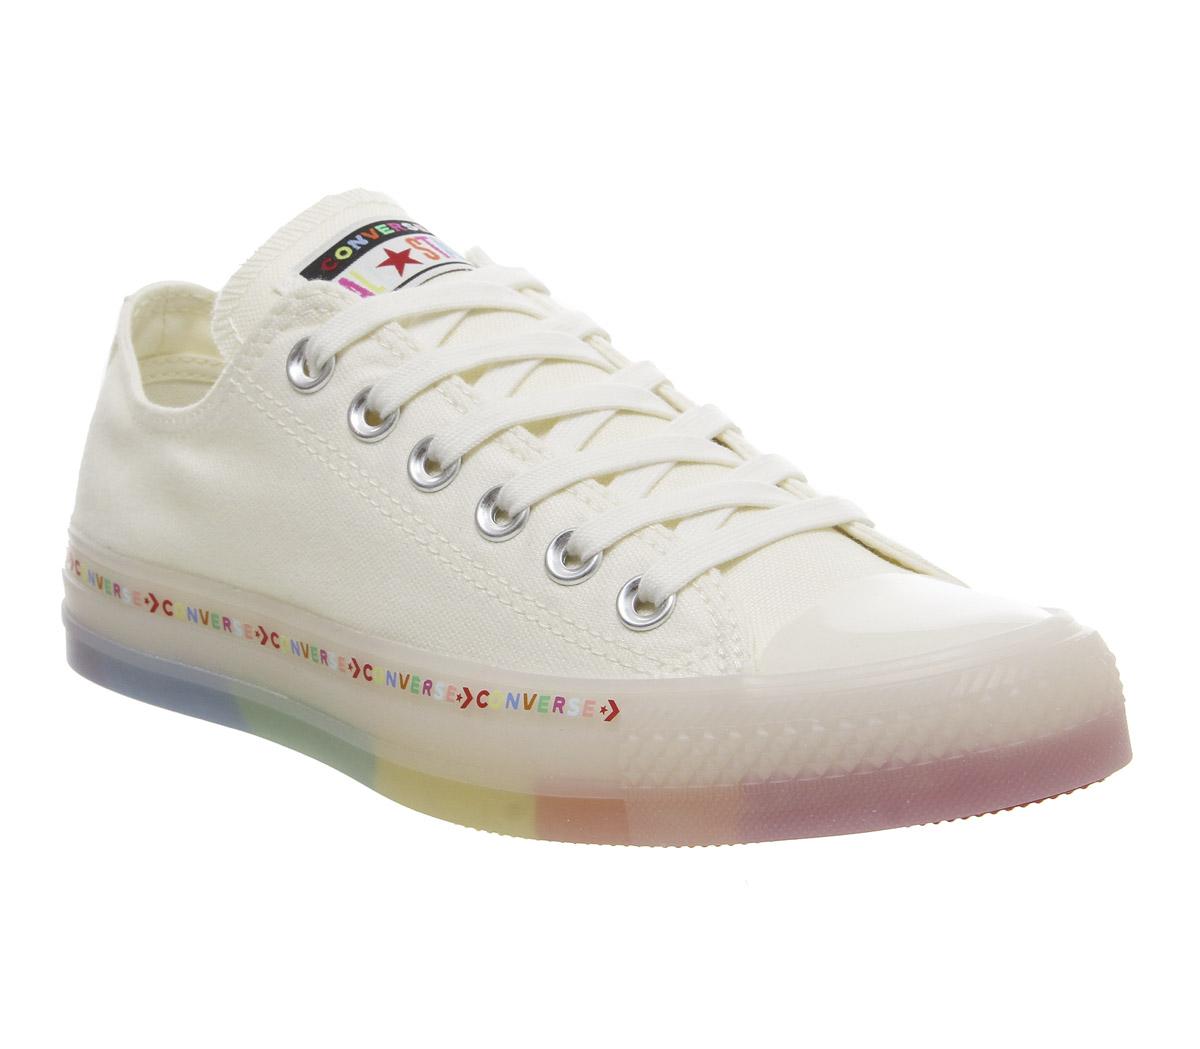 converse converse all star low trainers egret white rainbow exclusive